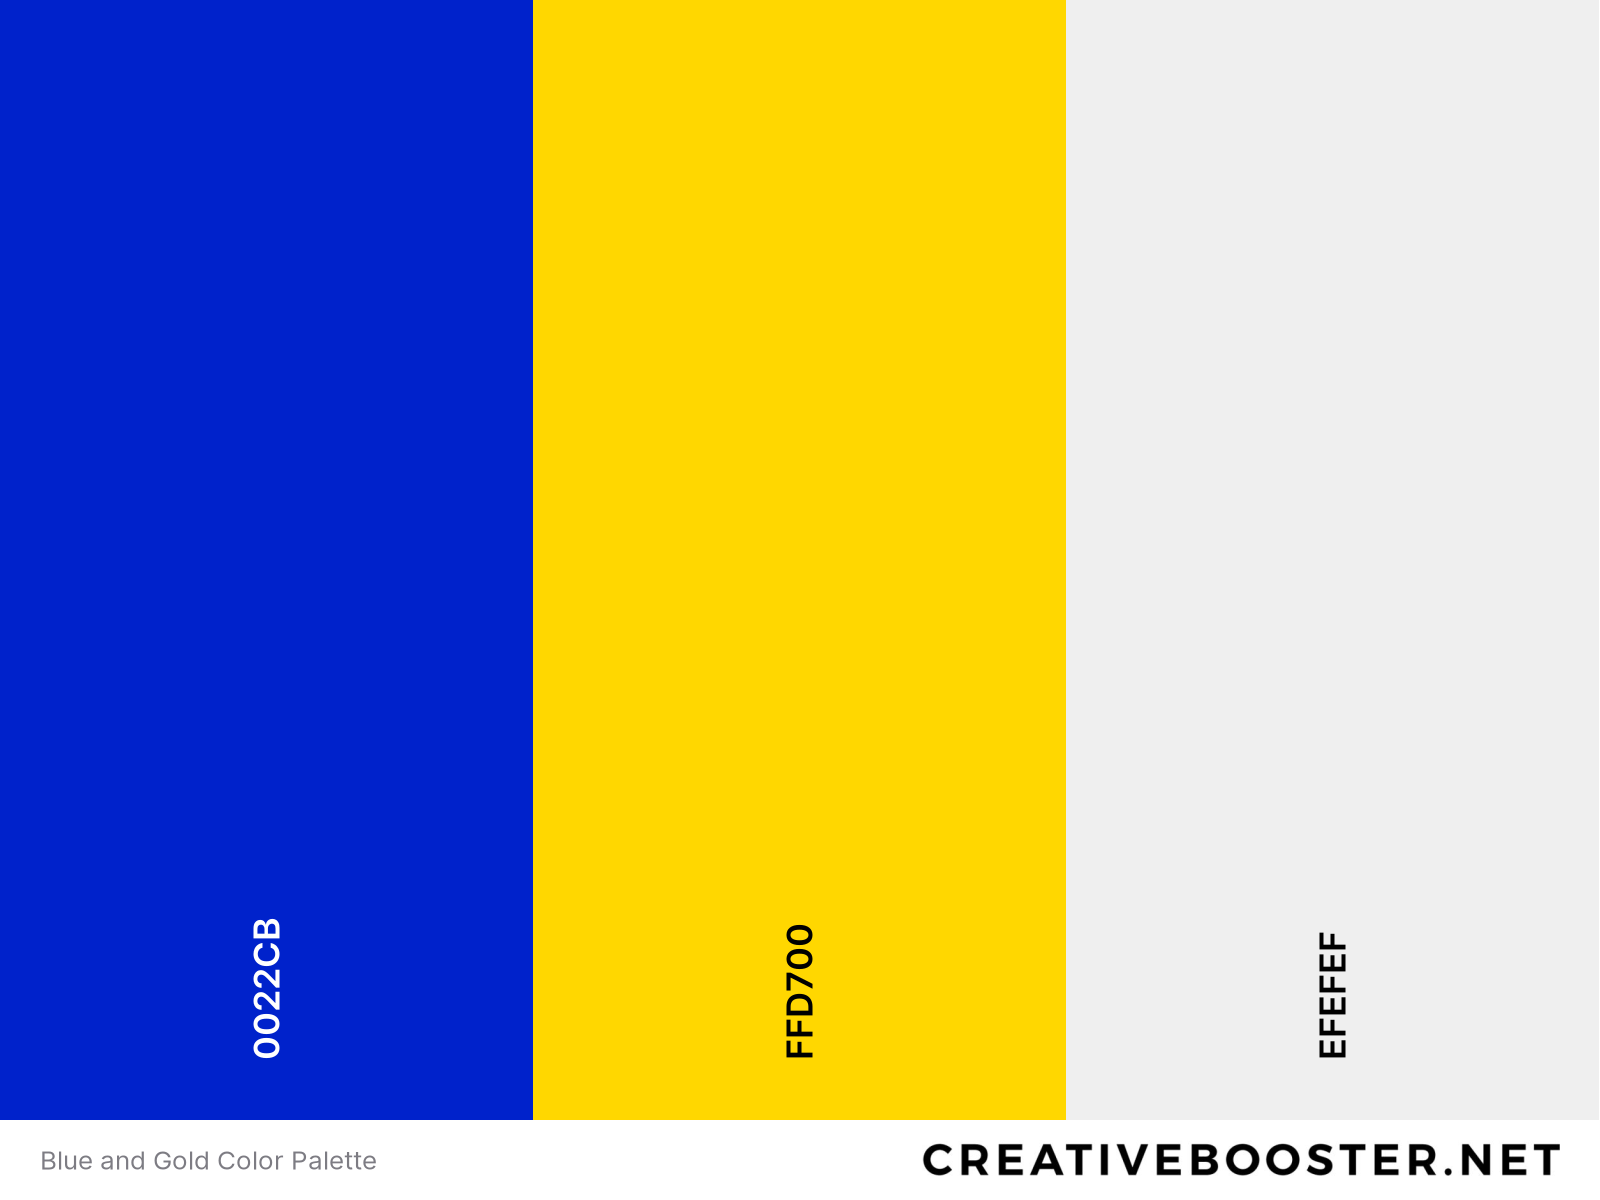 Blue and Gold Color Palette